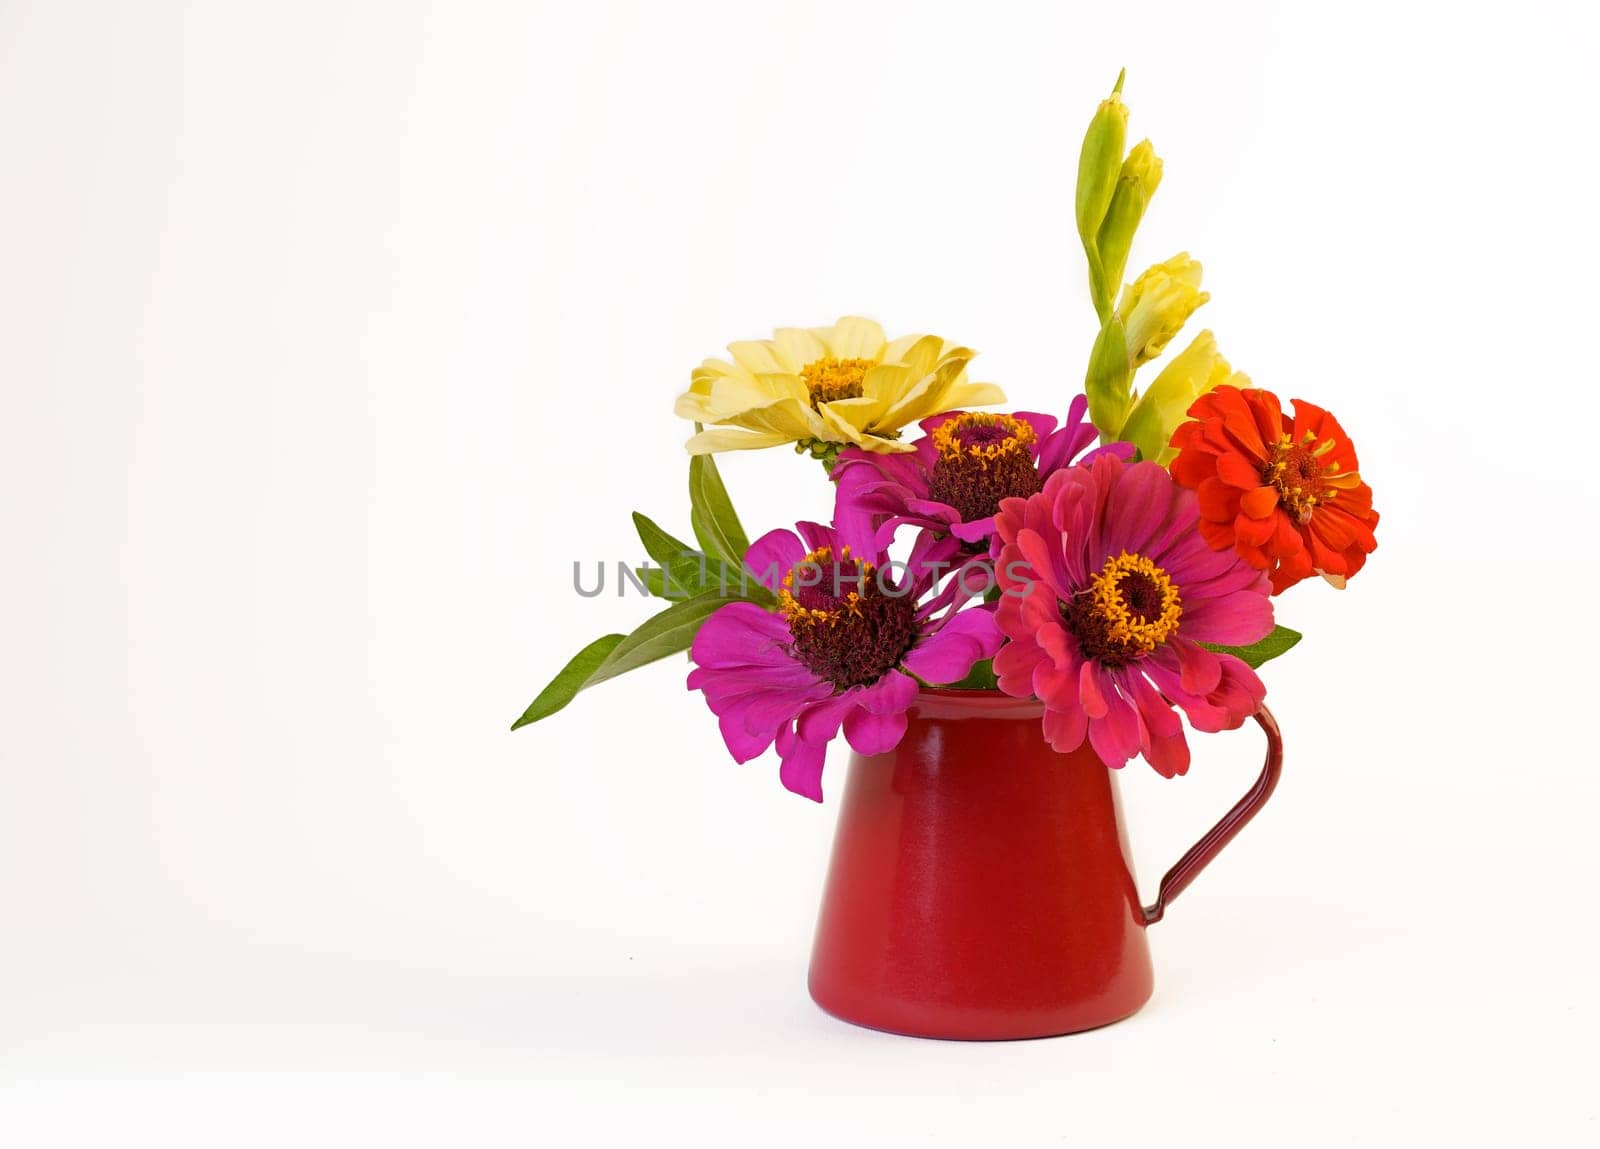 small bouquet of summer flowers in a red vase on a white background